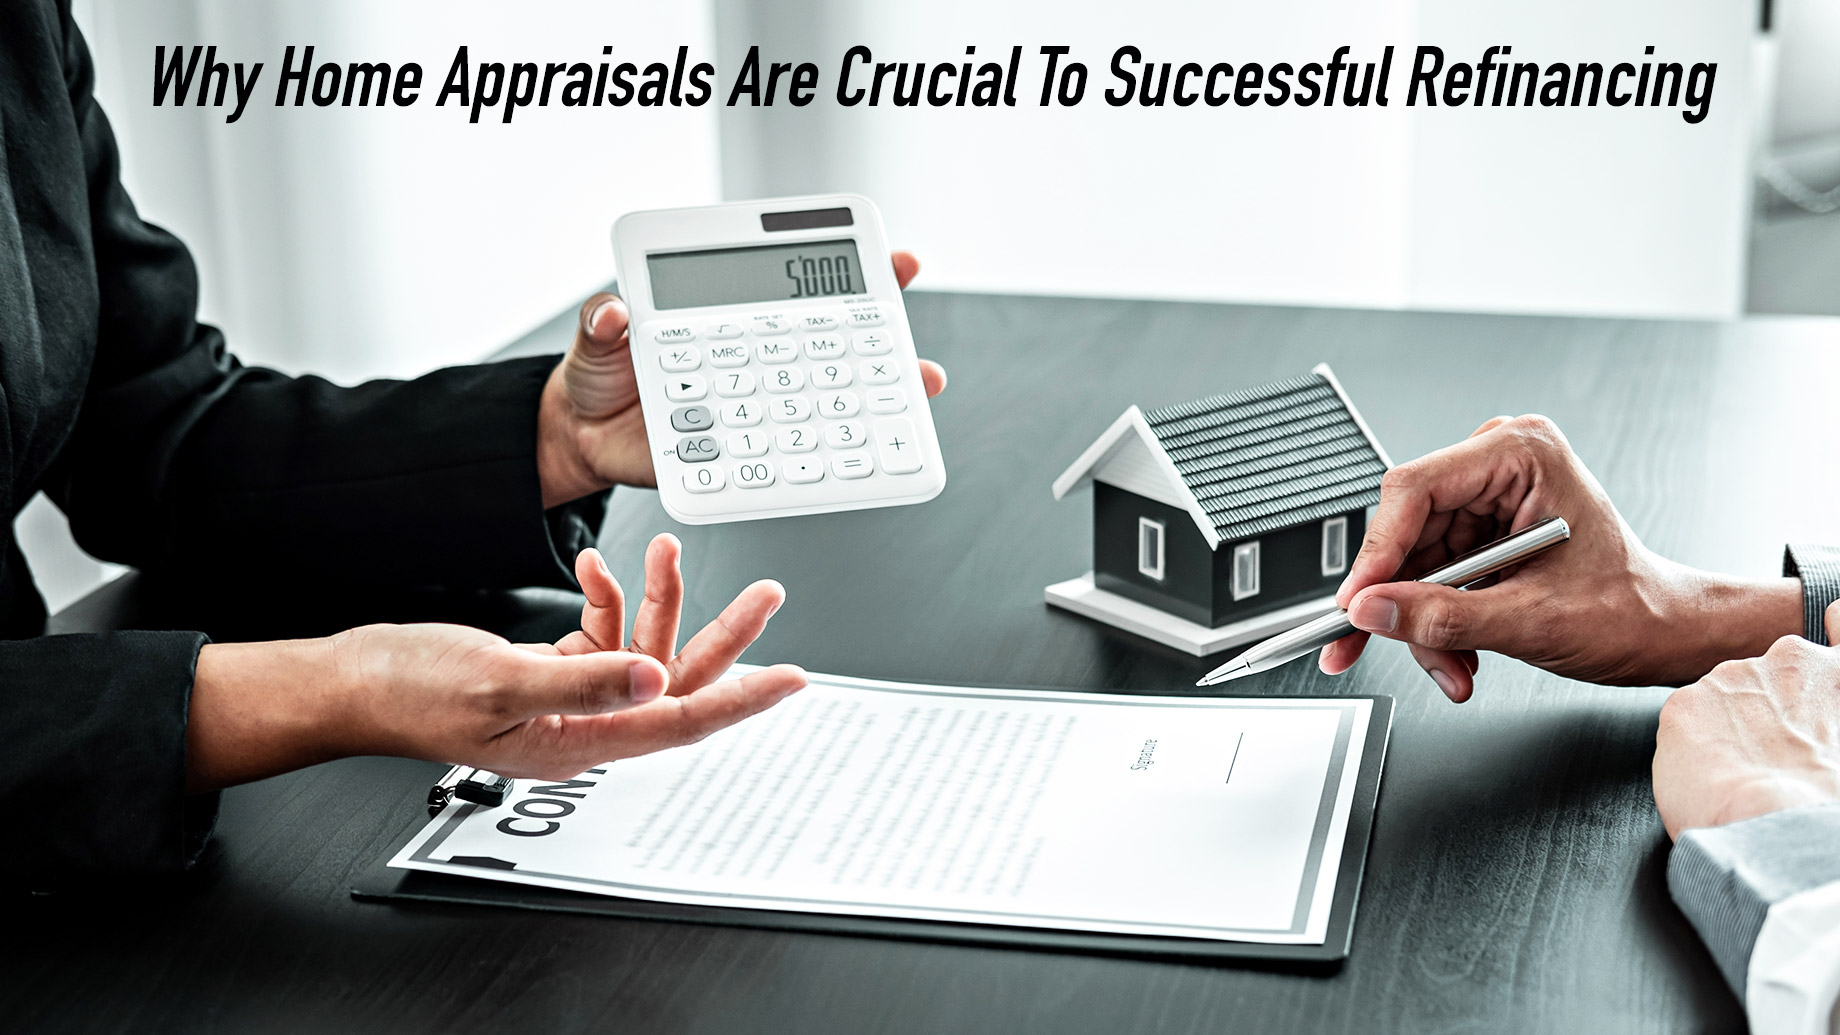 Why Home Appraisals Are Crucial To Successful Refinancing